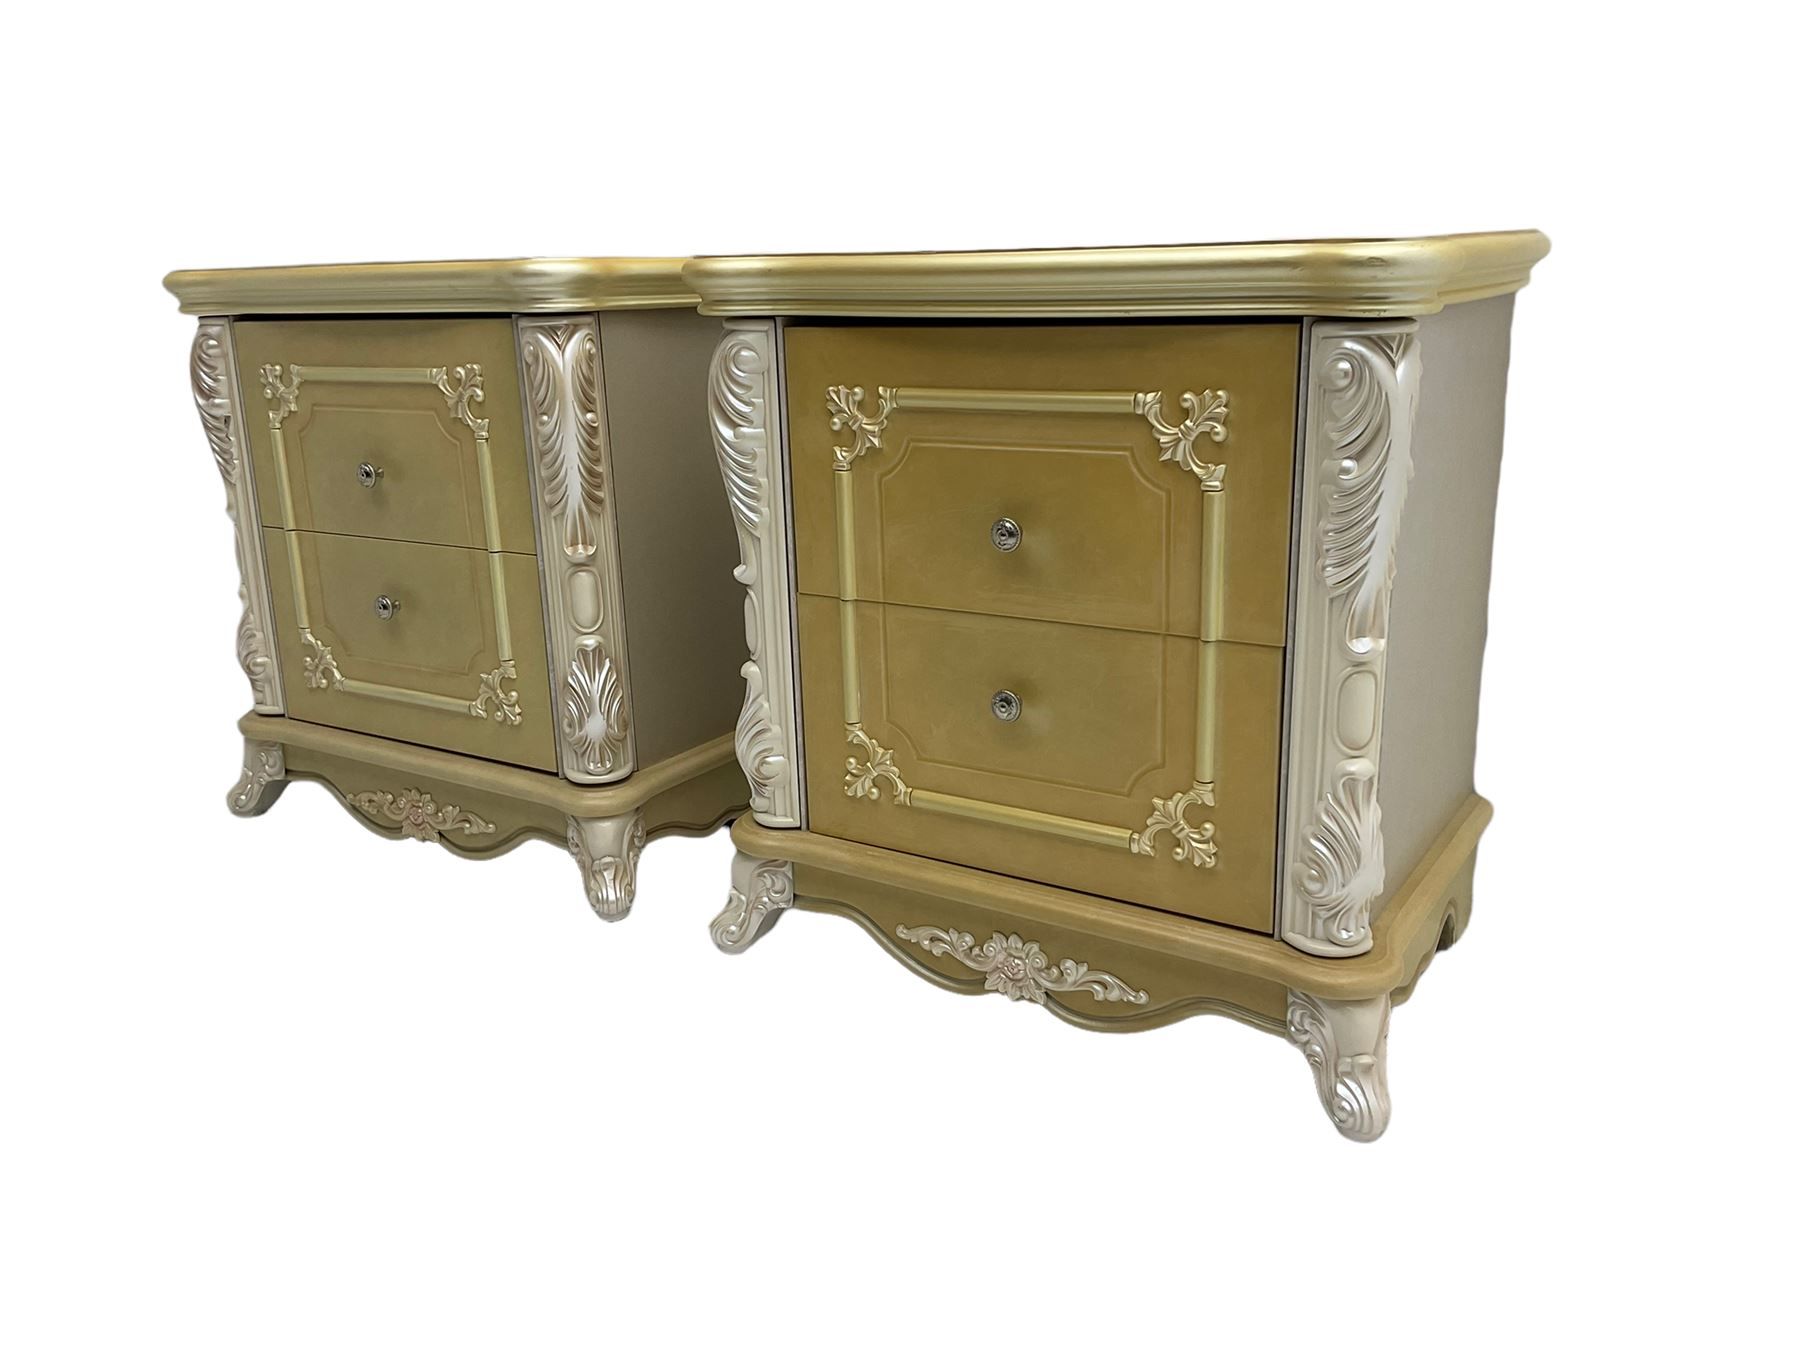 Pair Rococo style wood finish bedside chests - Image 3 of 6